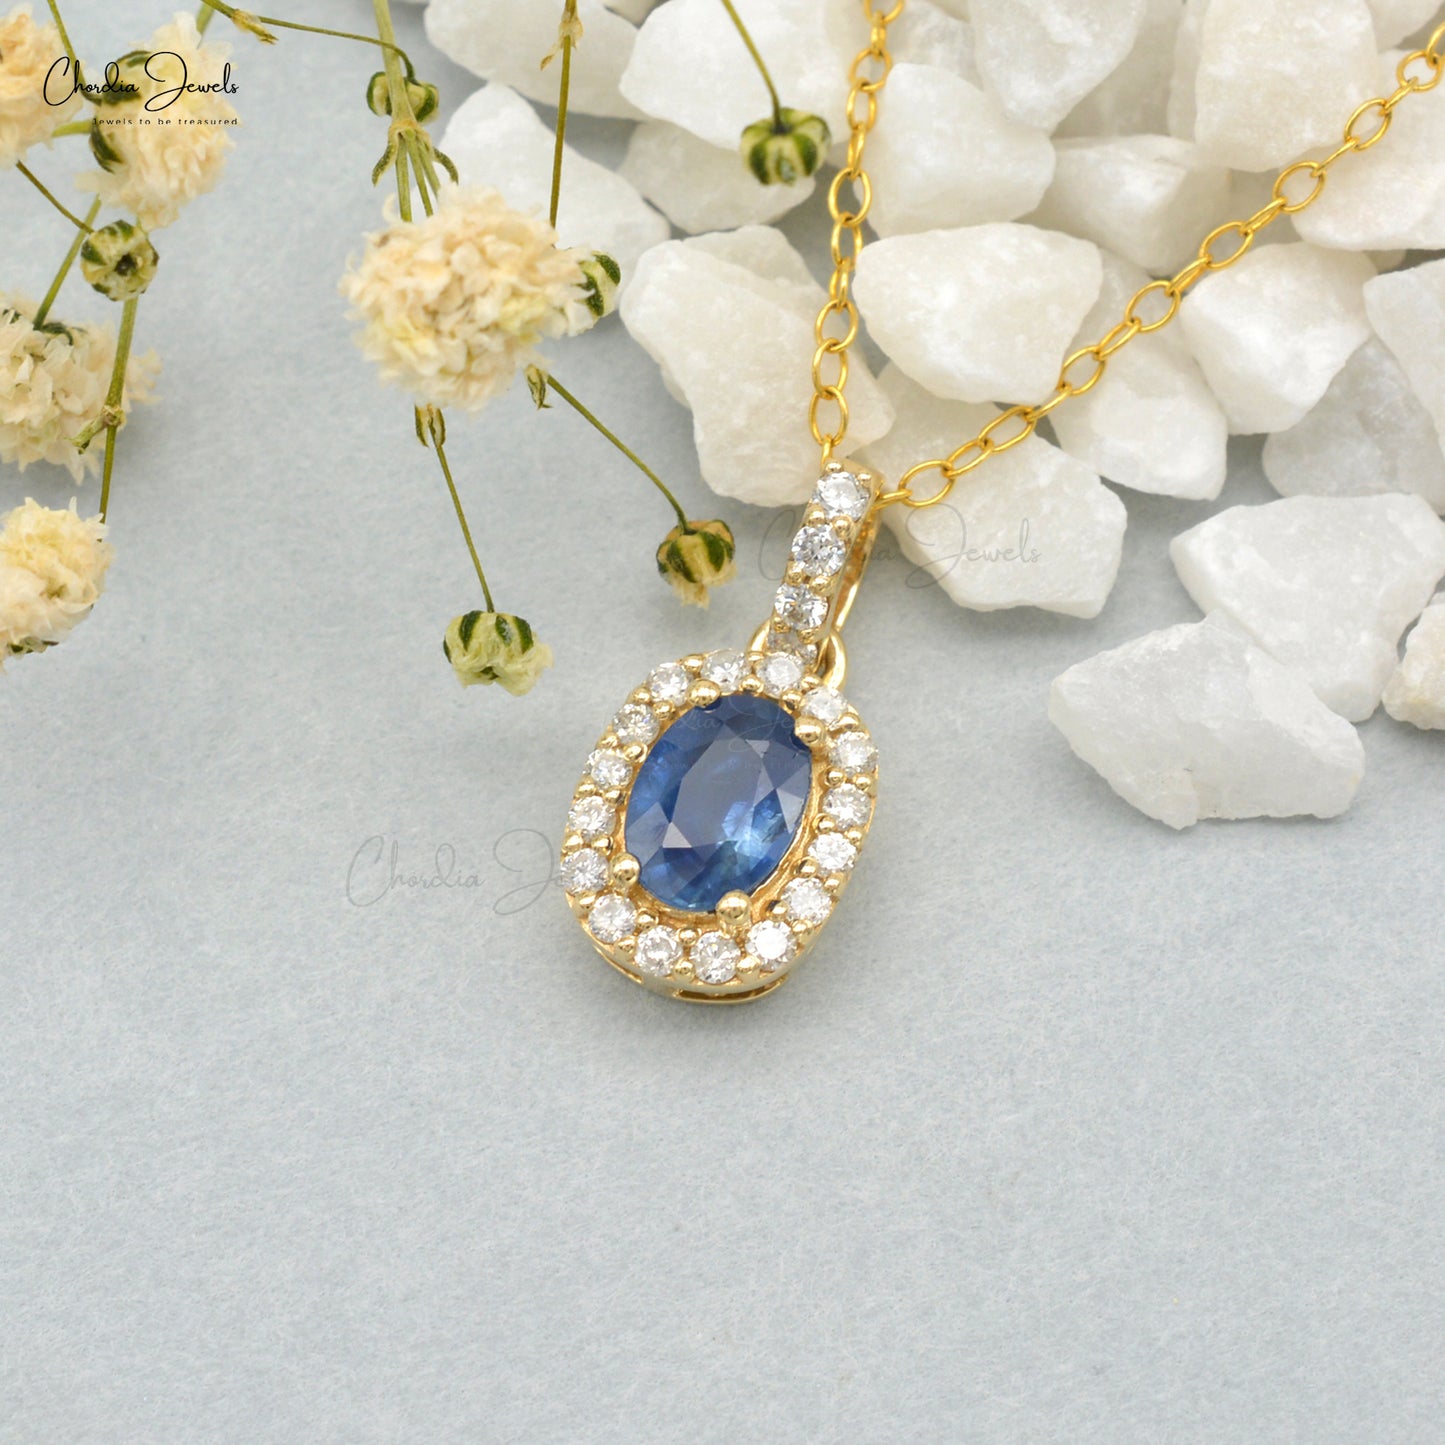 Natural Blue Sapphire Pendant, 14k Solid Yellow Gold Halo Pendant, 7x5mm Oval Faceted Gemstone Pendant, September Birthstone Pendant Gift for Her